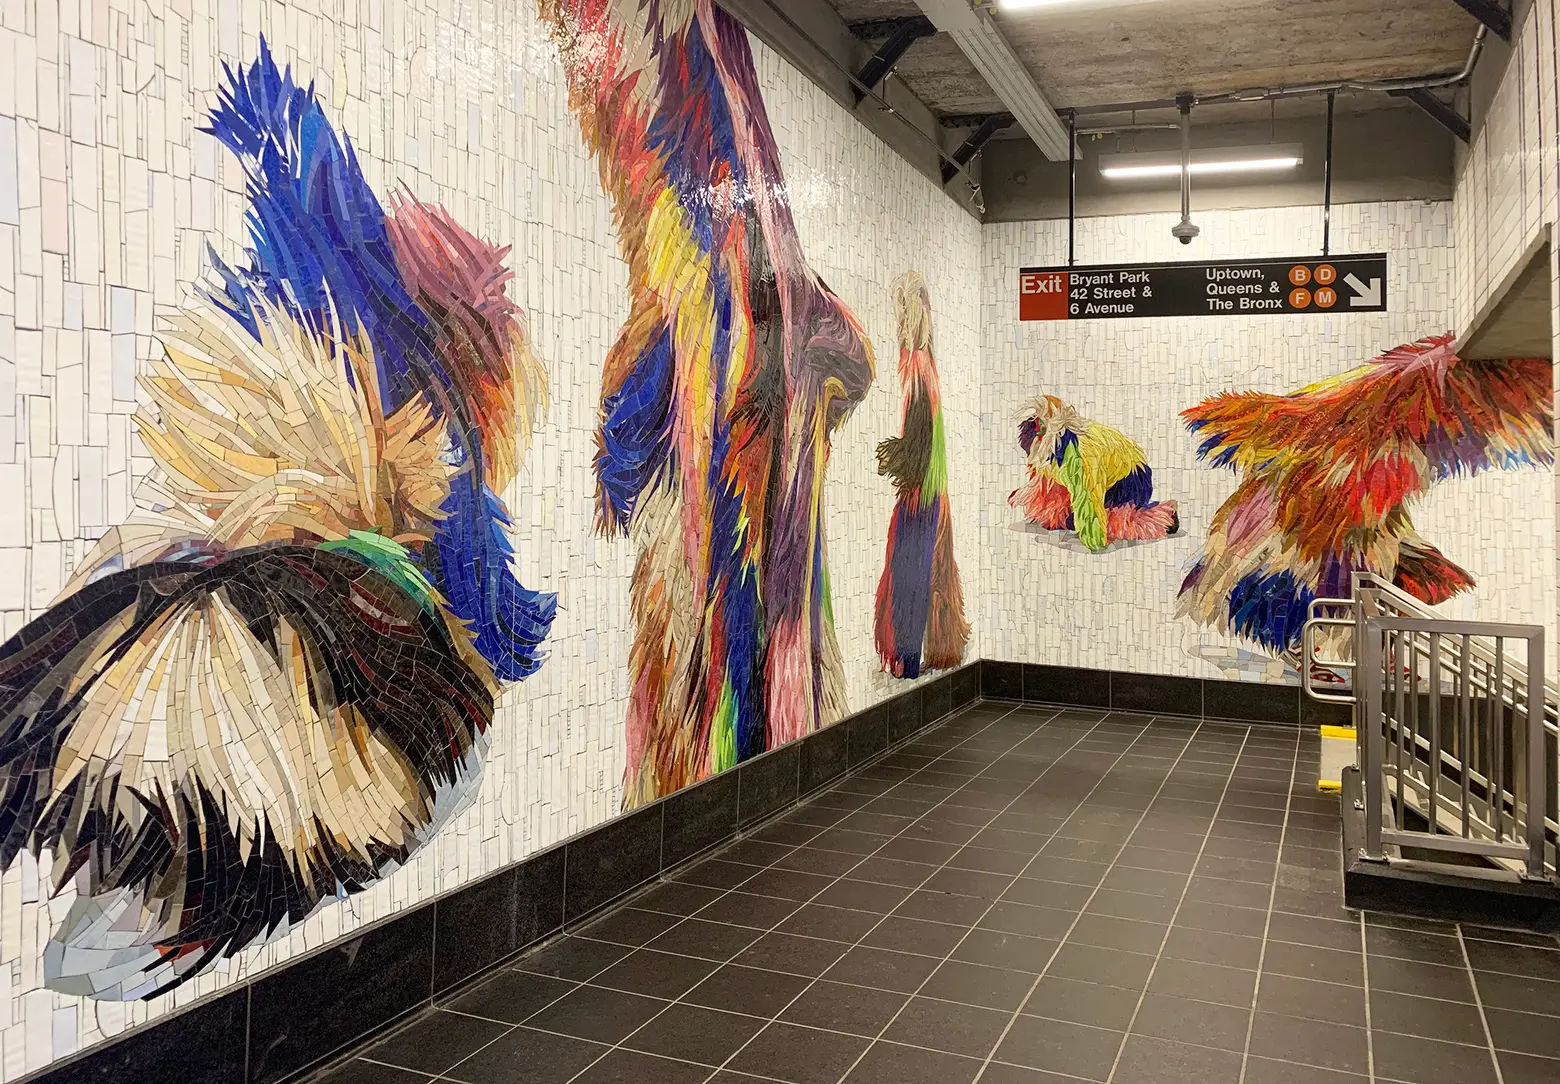 Colorful ‘Soundsuits’ mosaics by Nick Cave revealed at 42nd Street Shuttle passageway